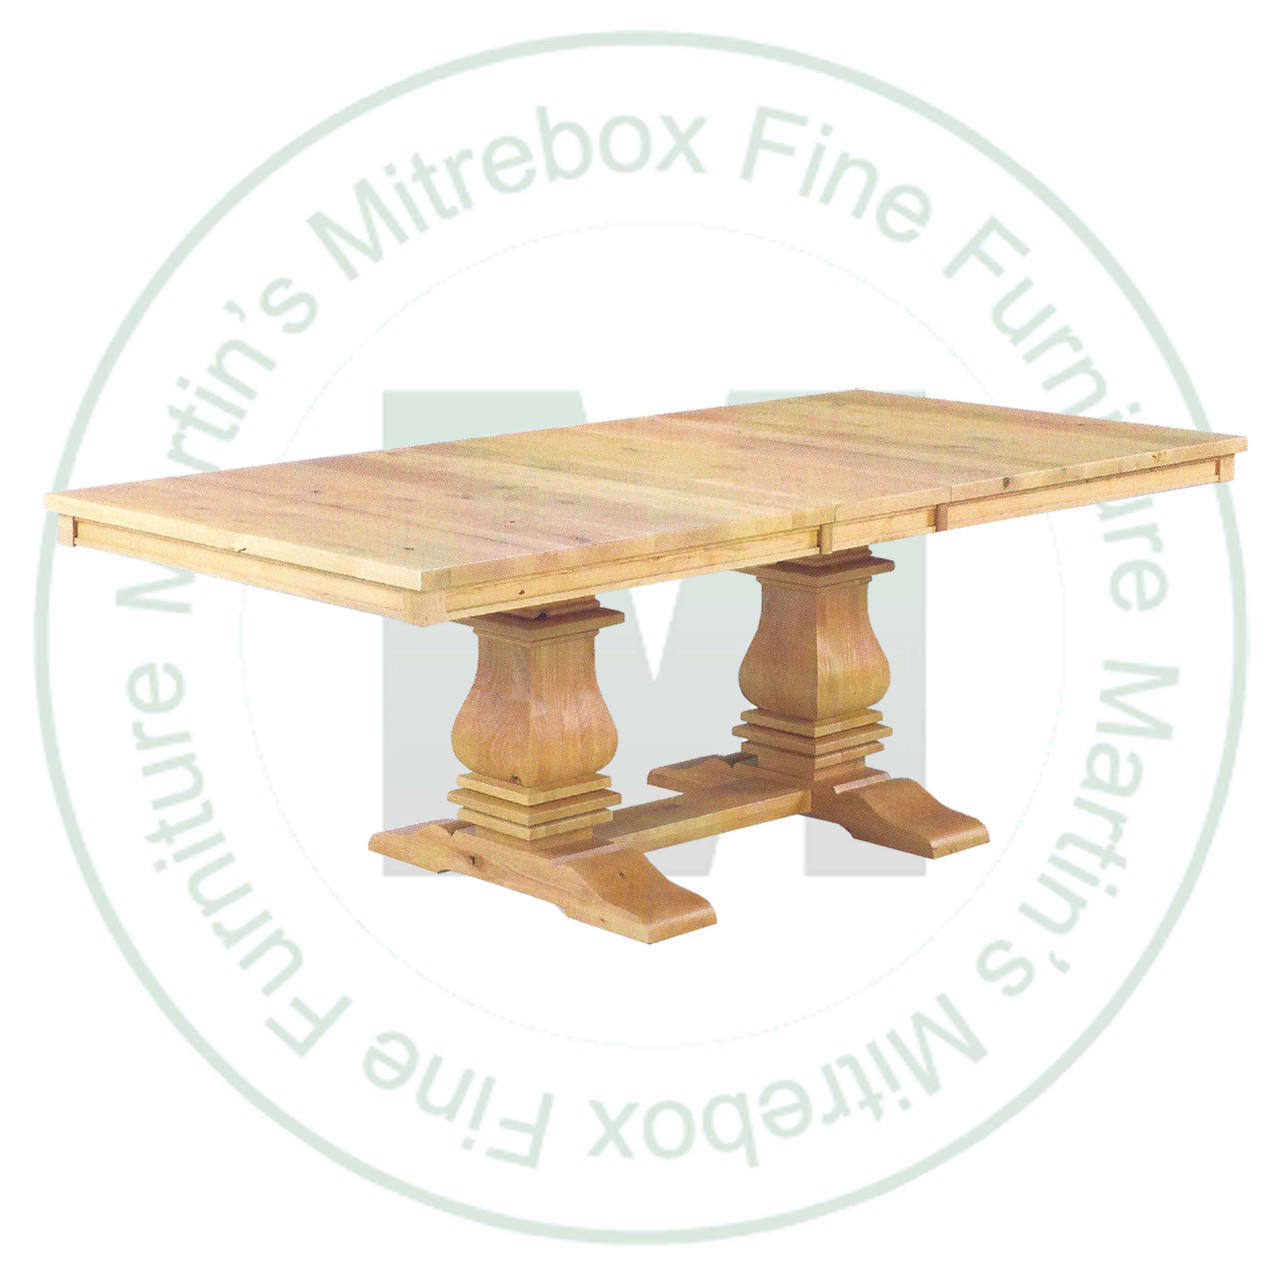 Wormy Maple Mediterranean Double Pedestal Table 48''D x 84''W x 30''H With 4 - 12'' Leaves. Table Has 1.25'' Thick Top